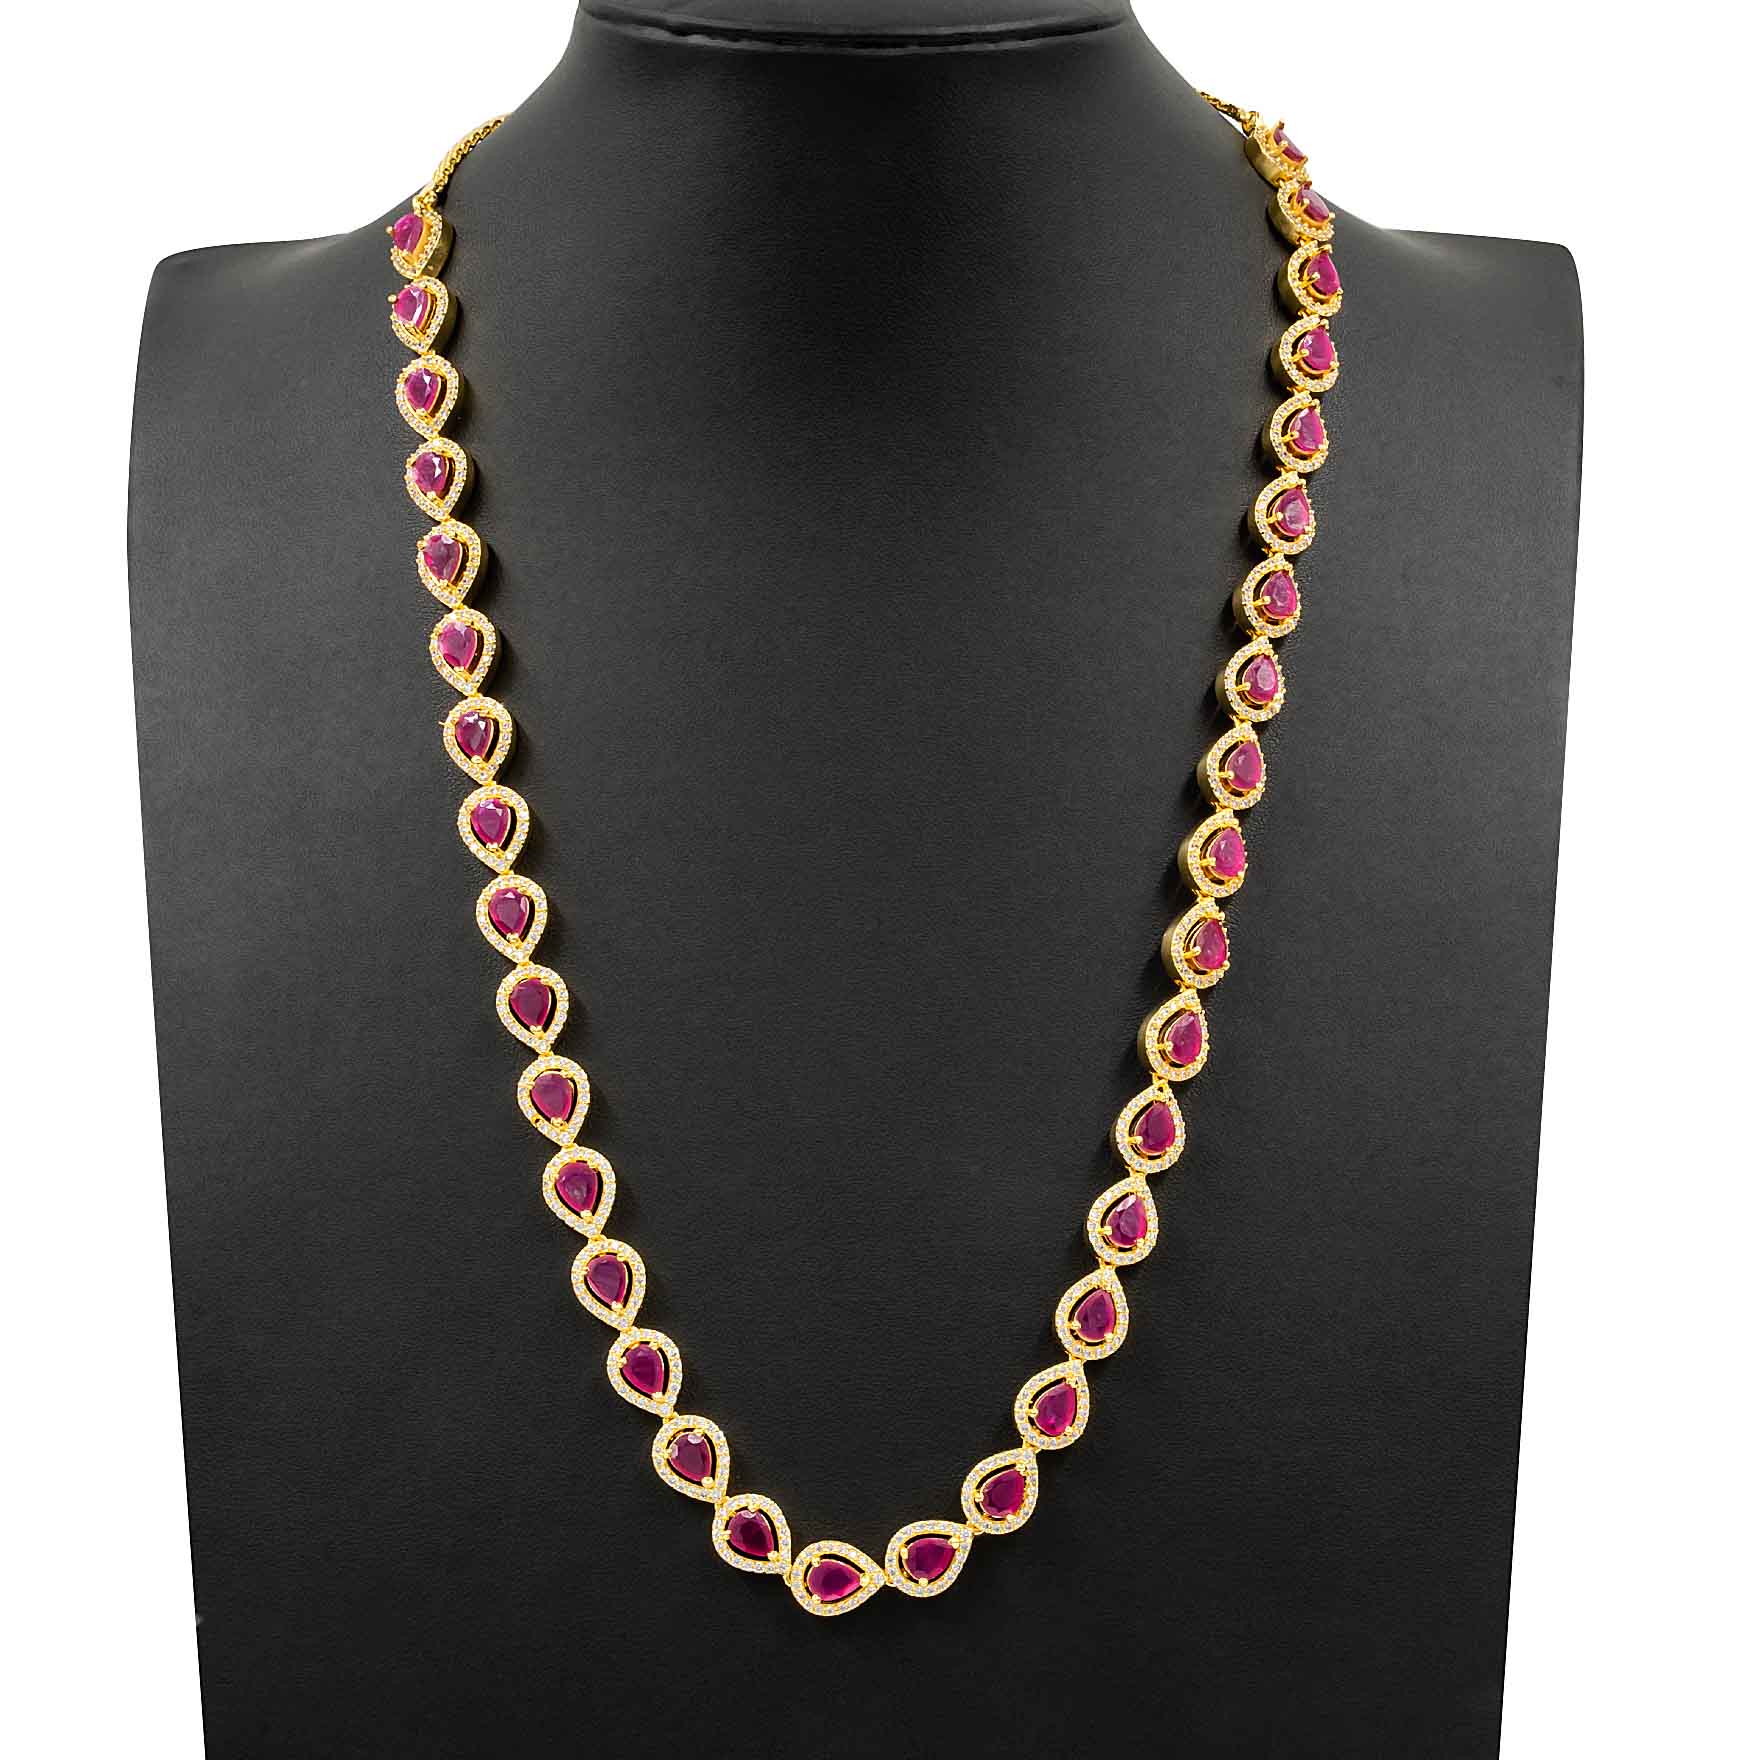 Premium Stone Necklace with Stud PMSNM1WR-0031, PMSHST30WR-022